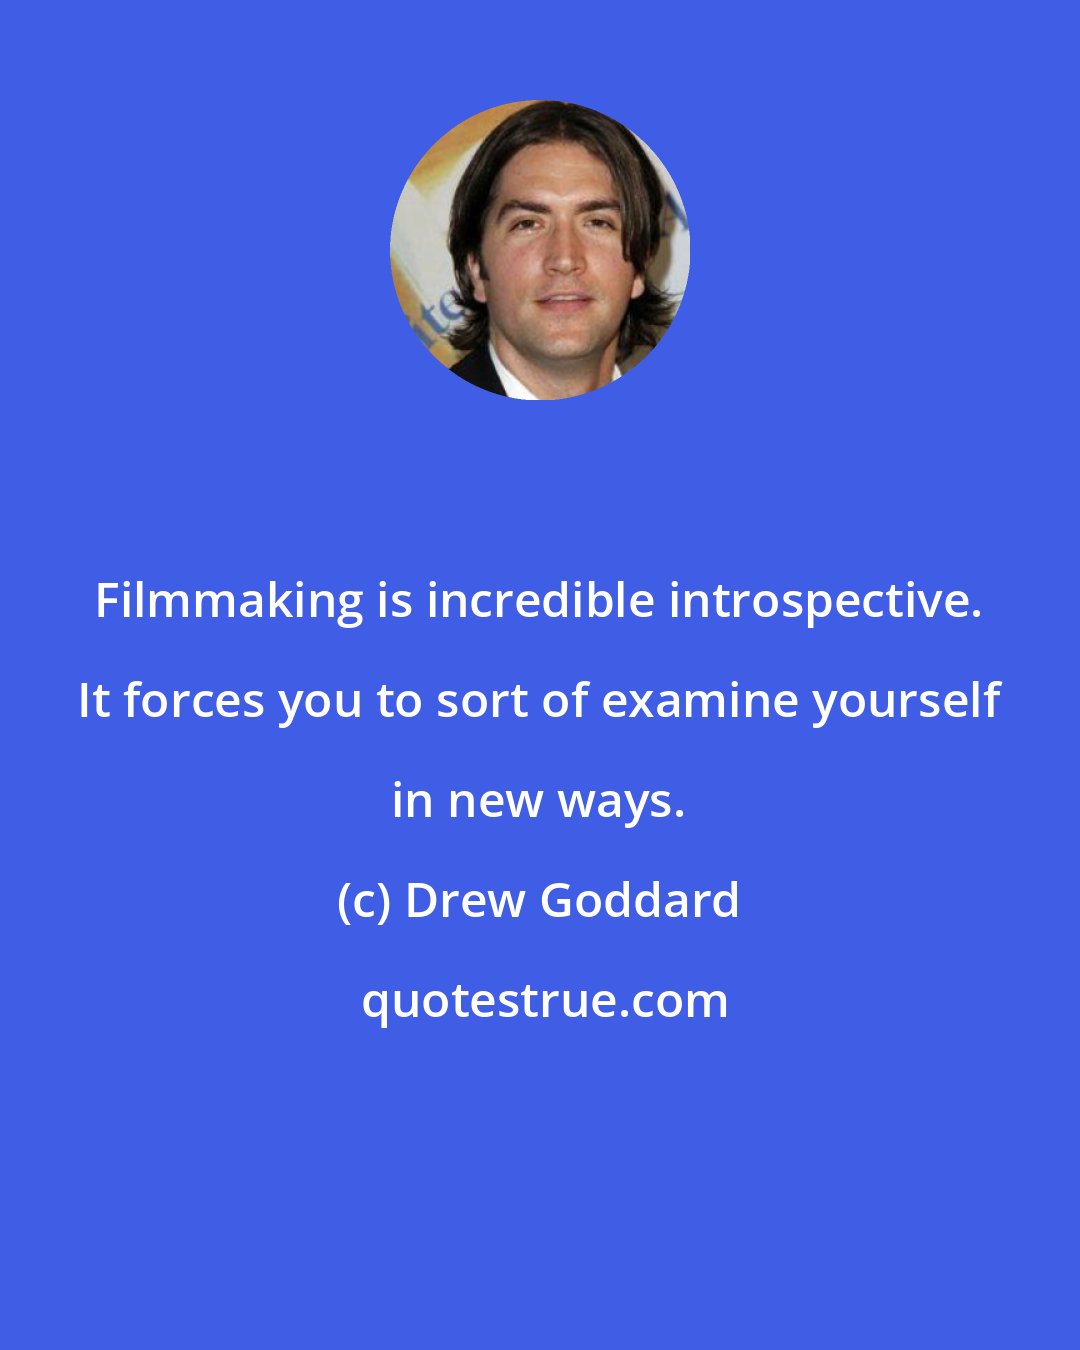 Drew Goddard: Filmmaking is incredible introspective. It forces you to sort of examine yourself in new ways.